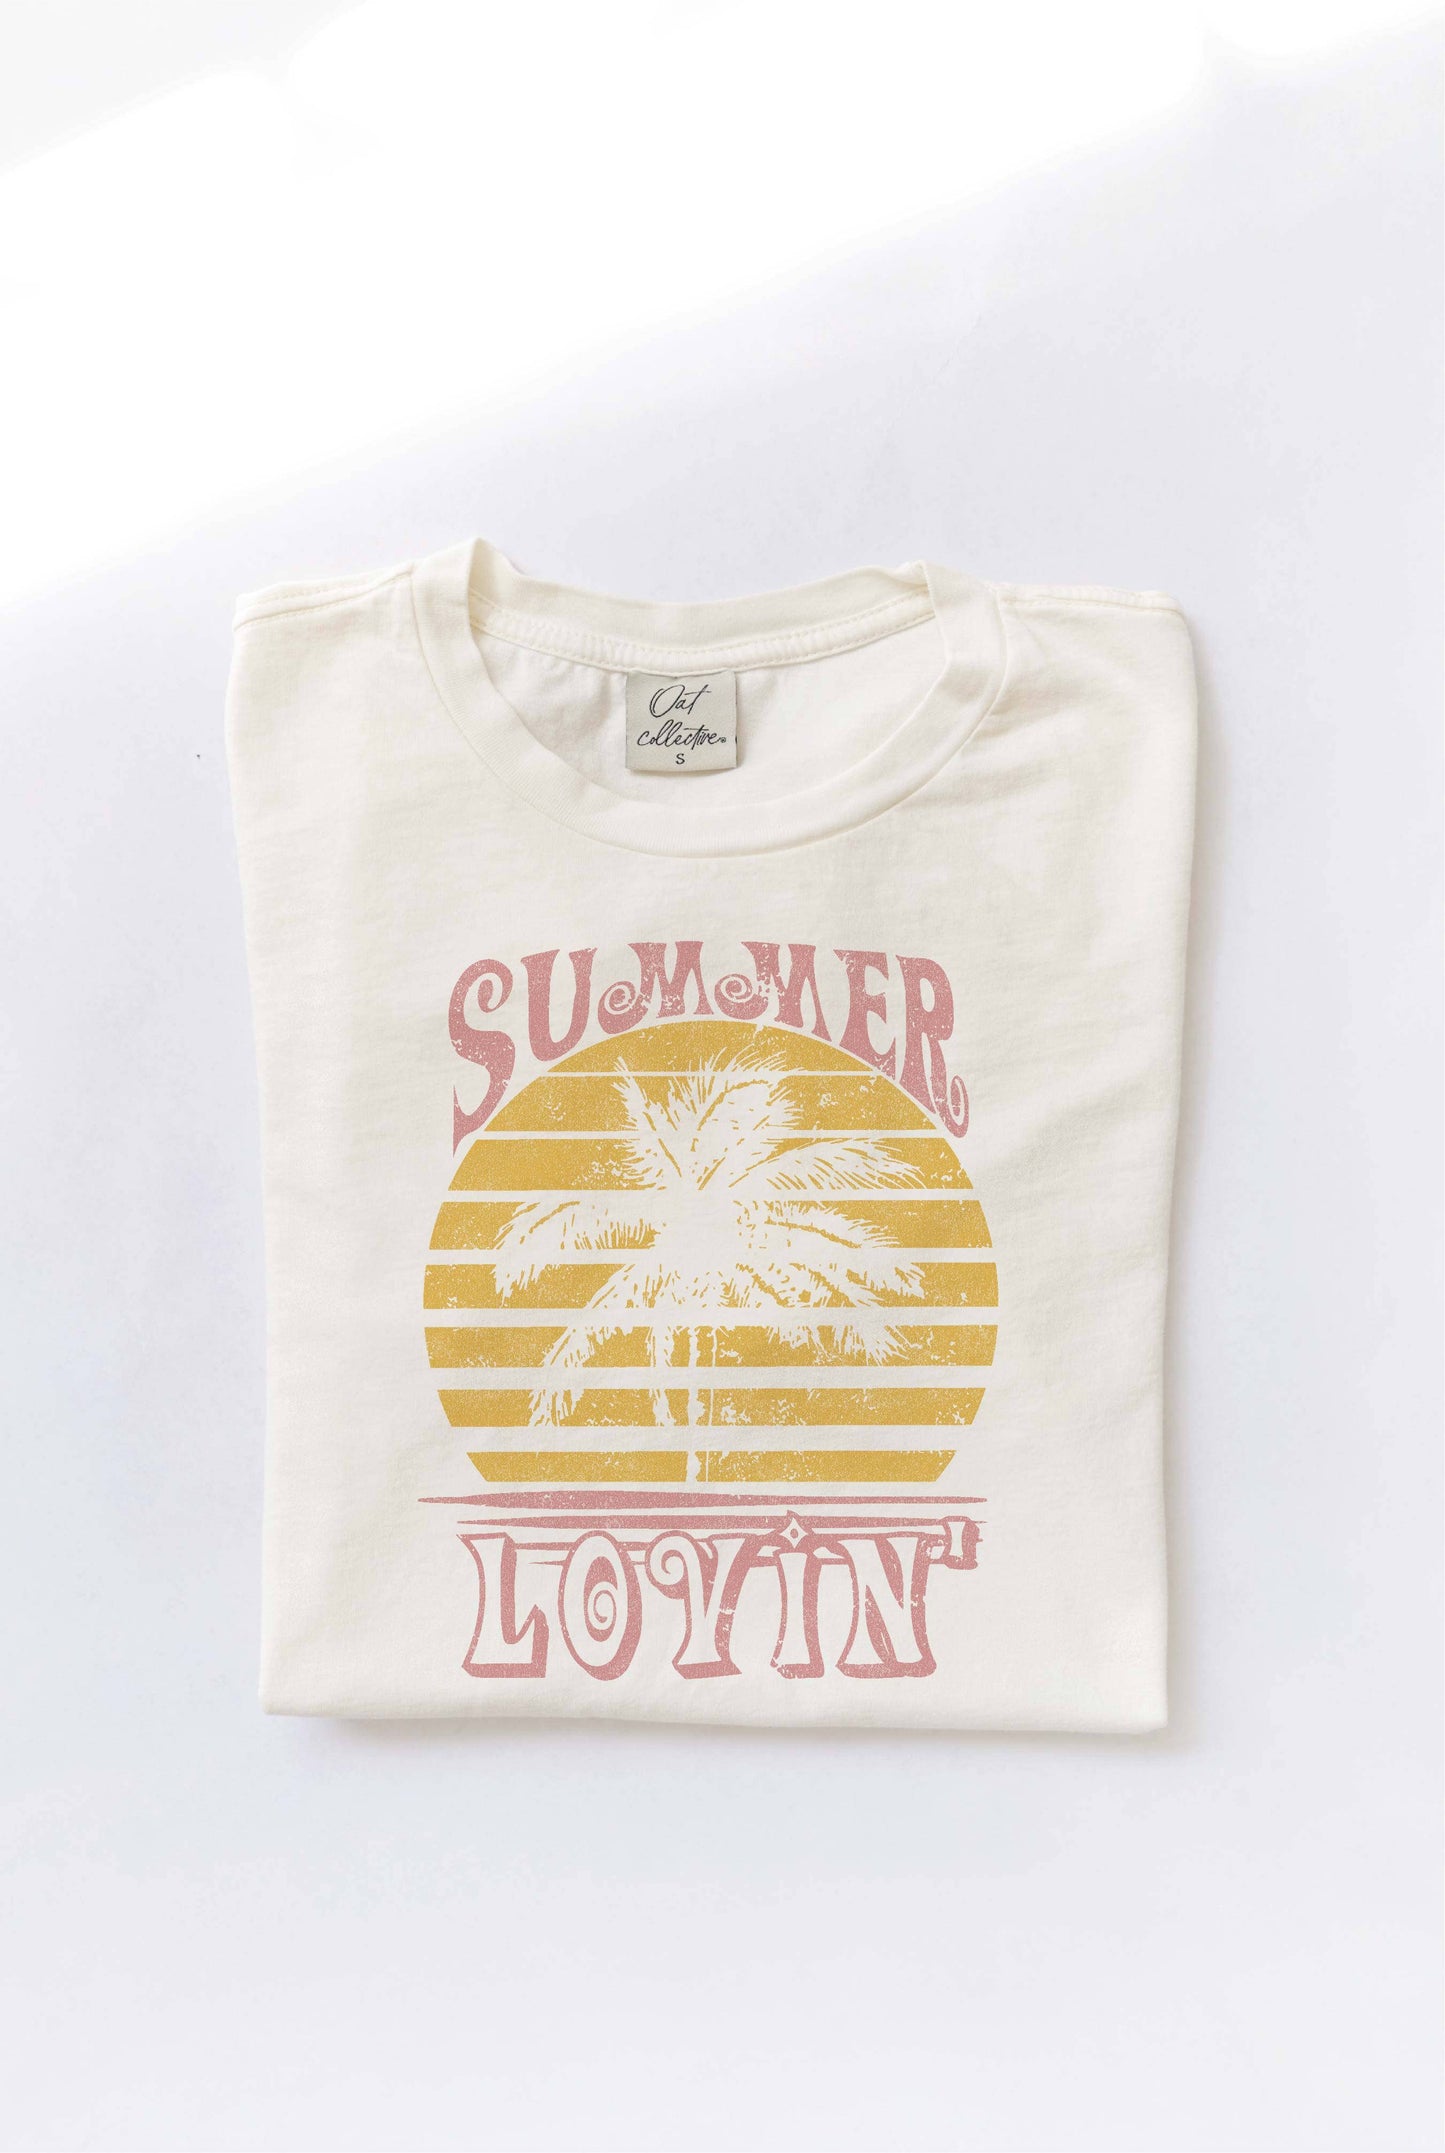 OAT COLLECTIVE - LARGE SUMMER LOVIN' Mineral Washed Graphic Top